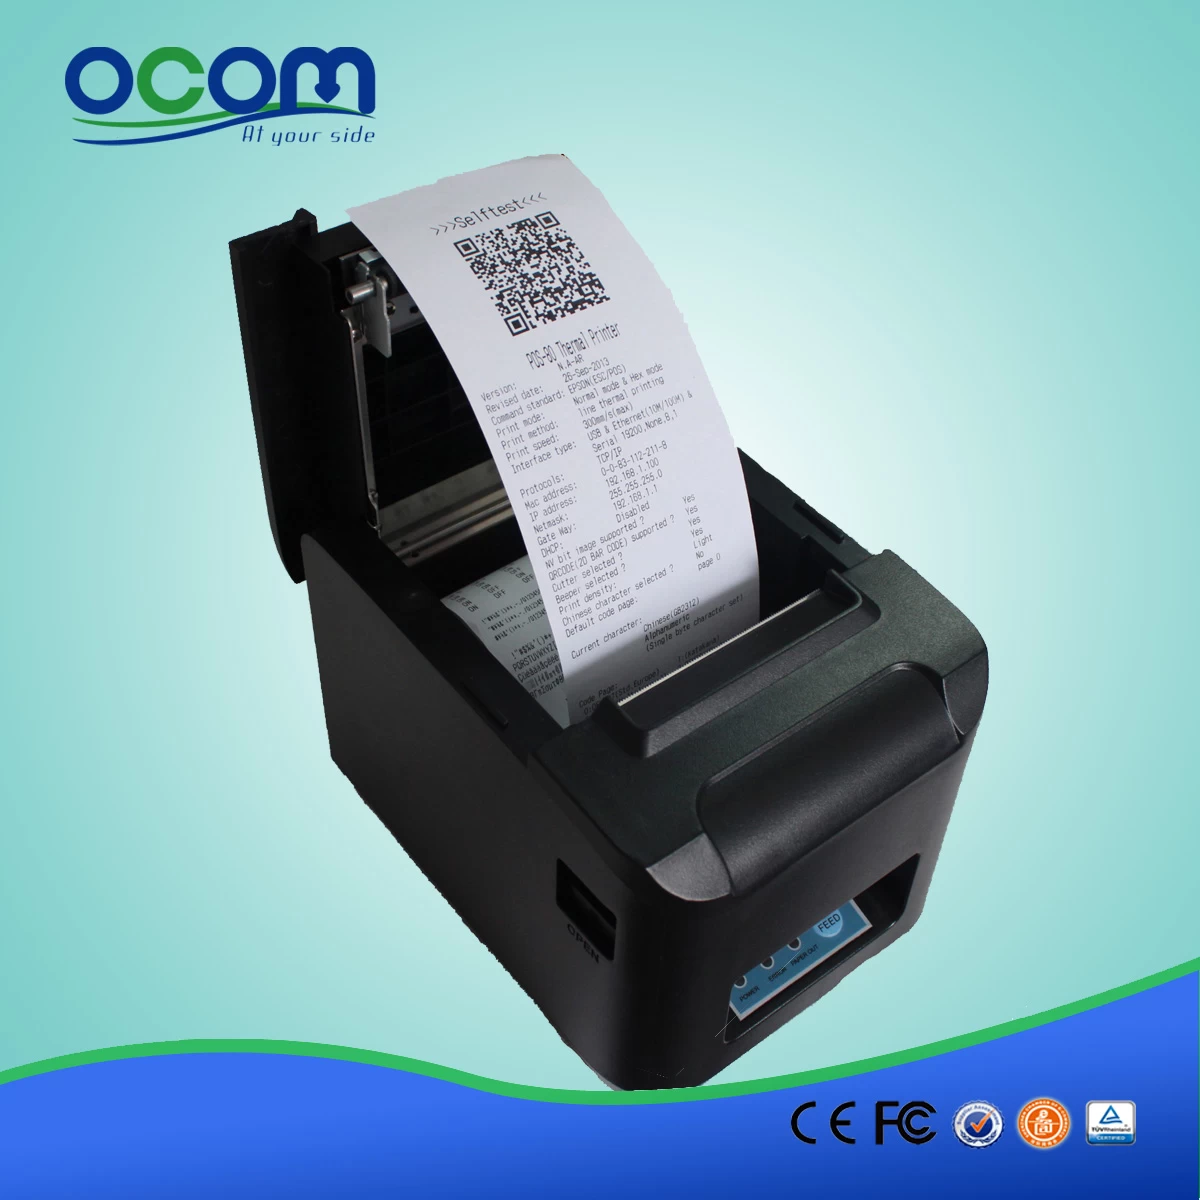 80mm Thermal Receipt Printer With Serial+USB+Ethernet Port , auto cutte